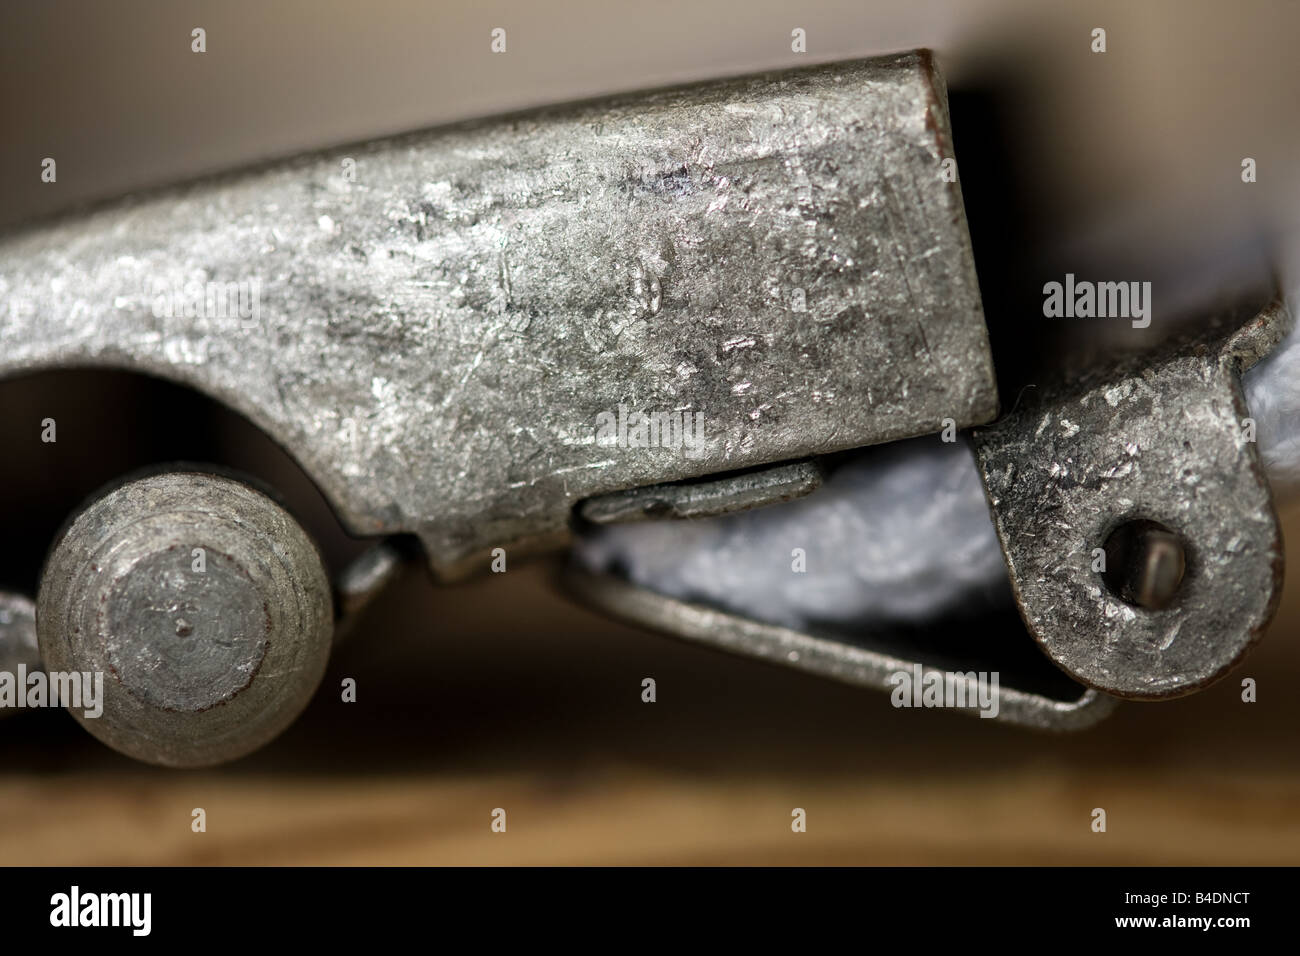 Close up photo of a metal belt buckle. Stock Photo